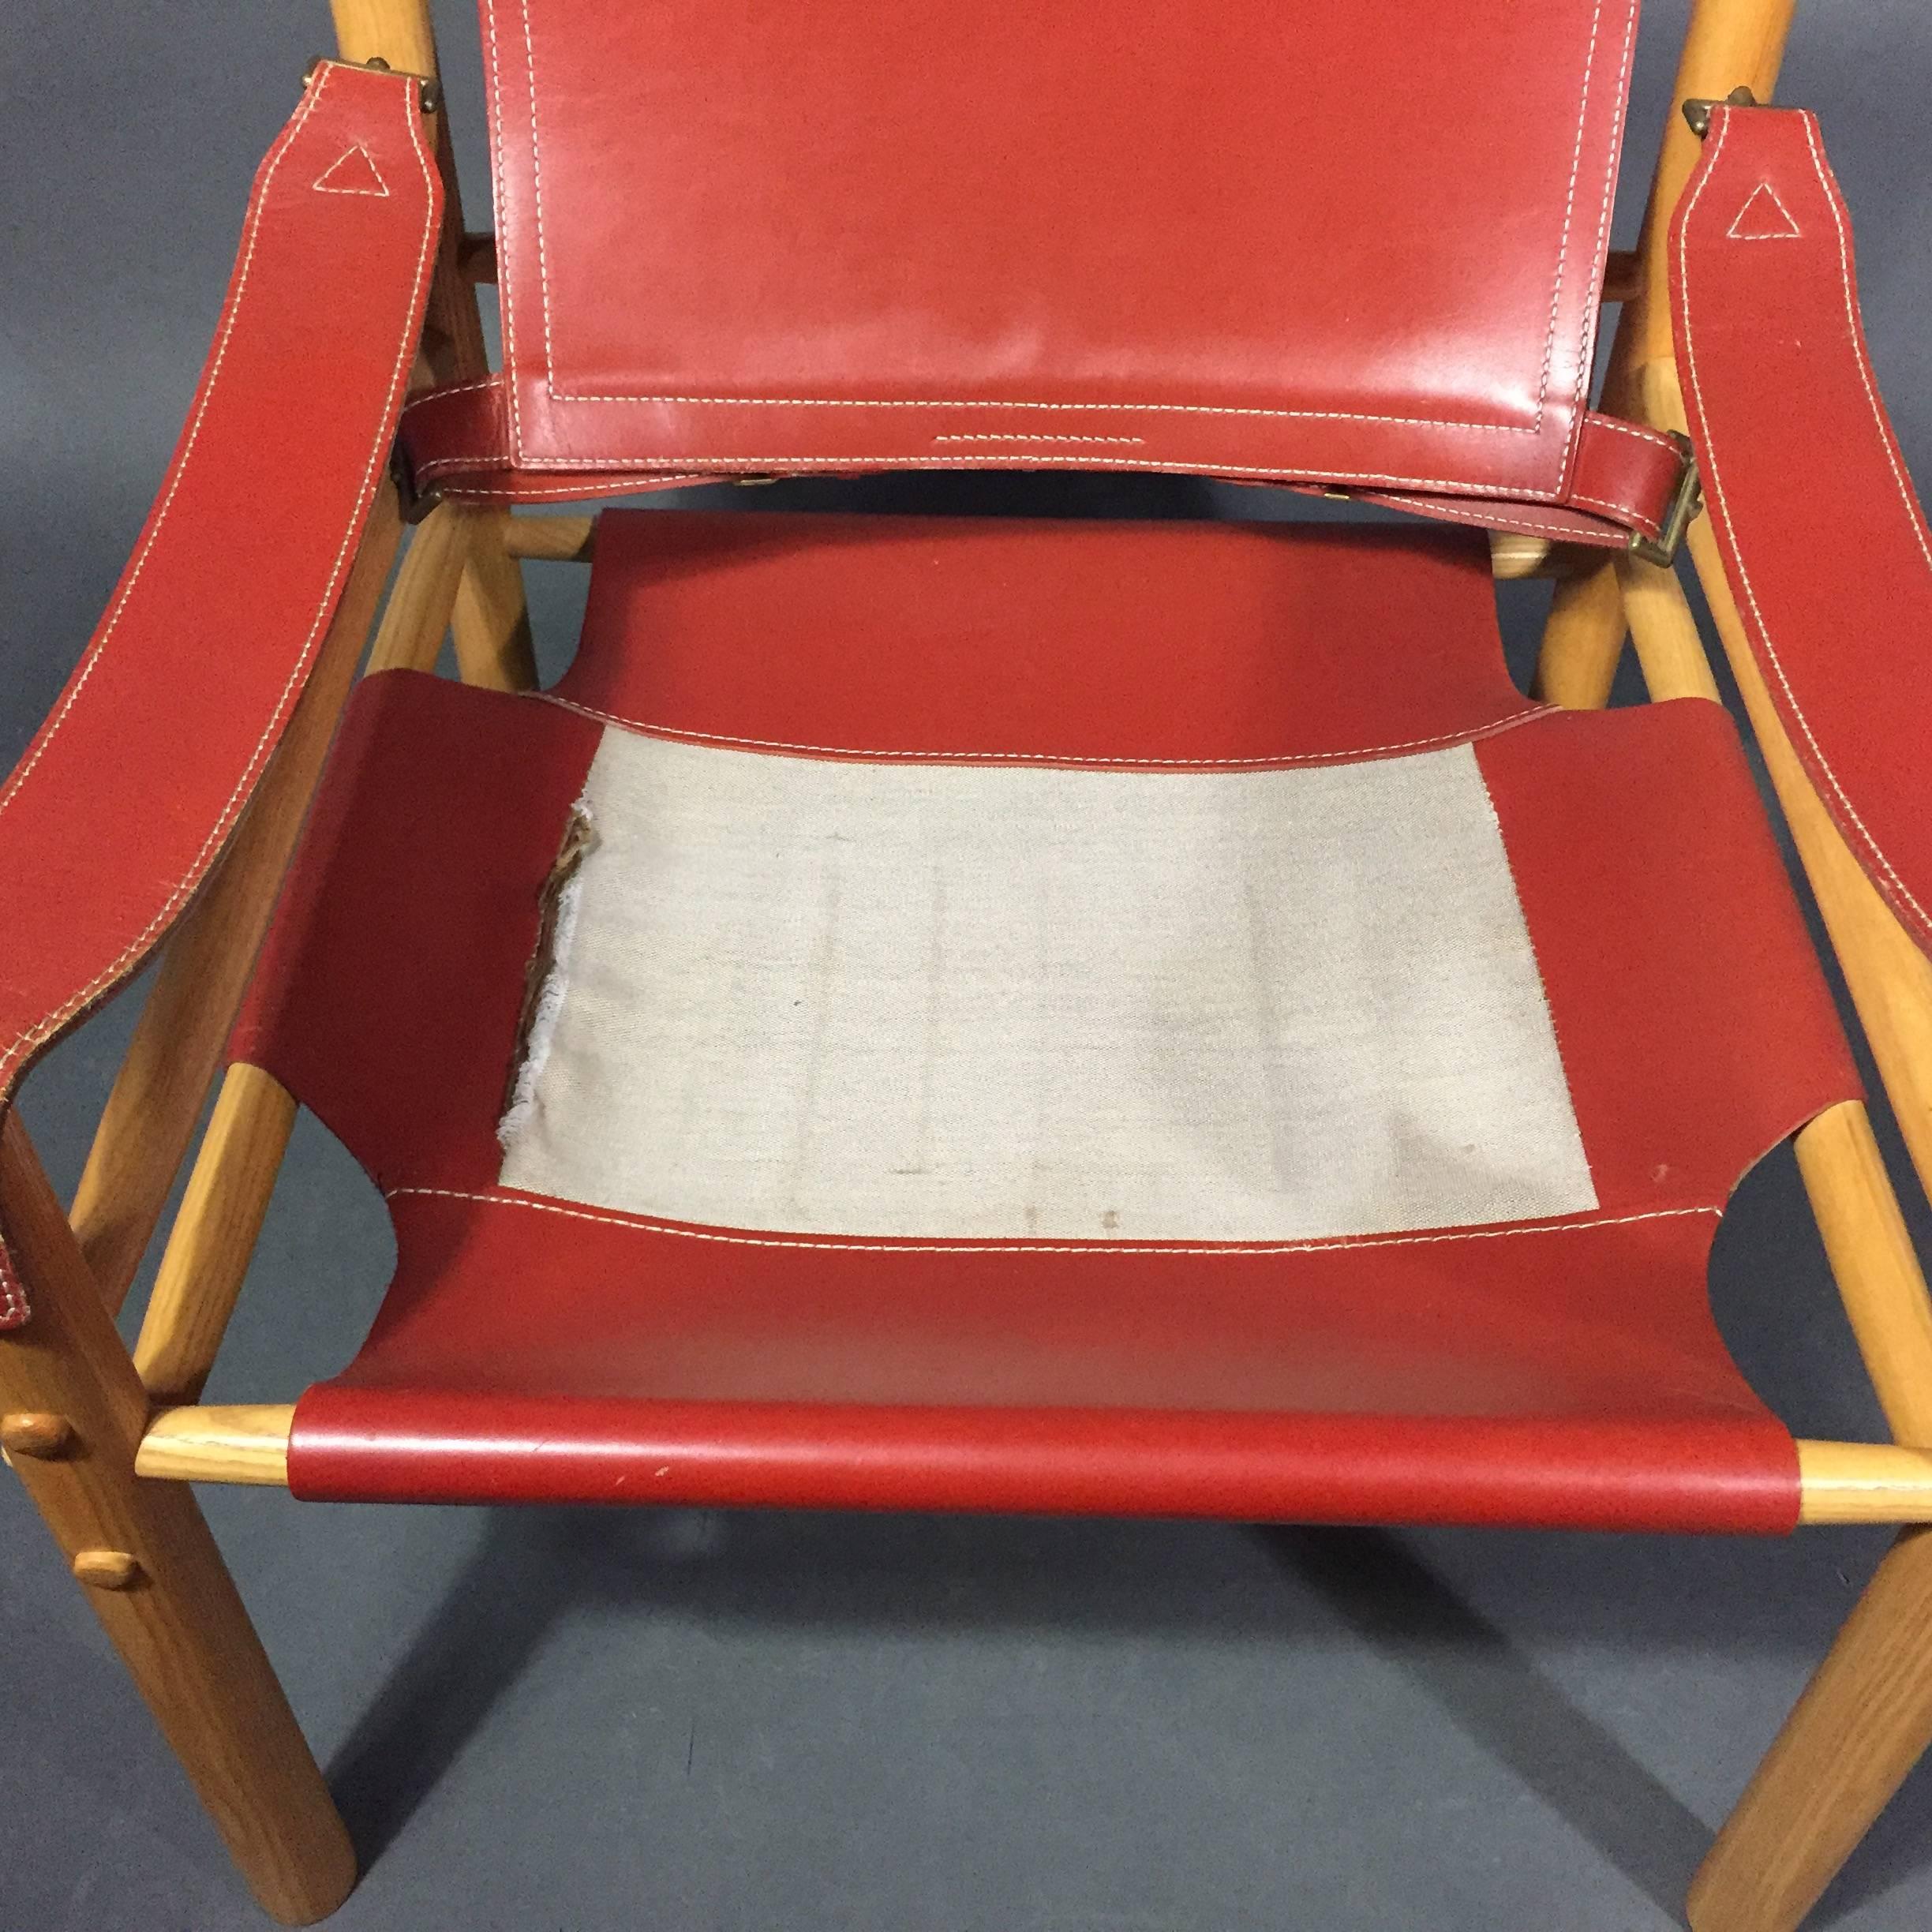 Pair of Arne Norell Red or Orange Leather Sirocco Chairs, Sweden For Sale 5